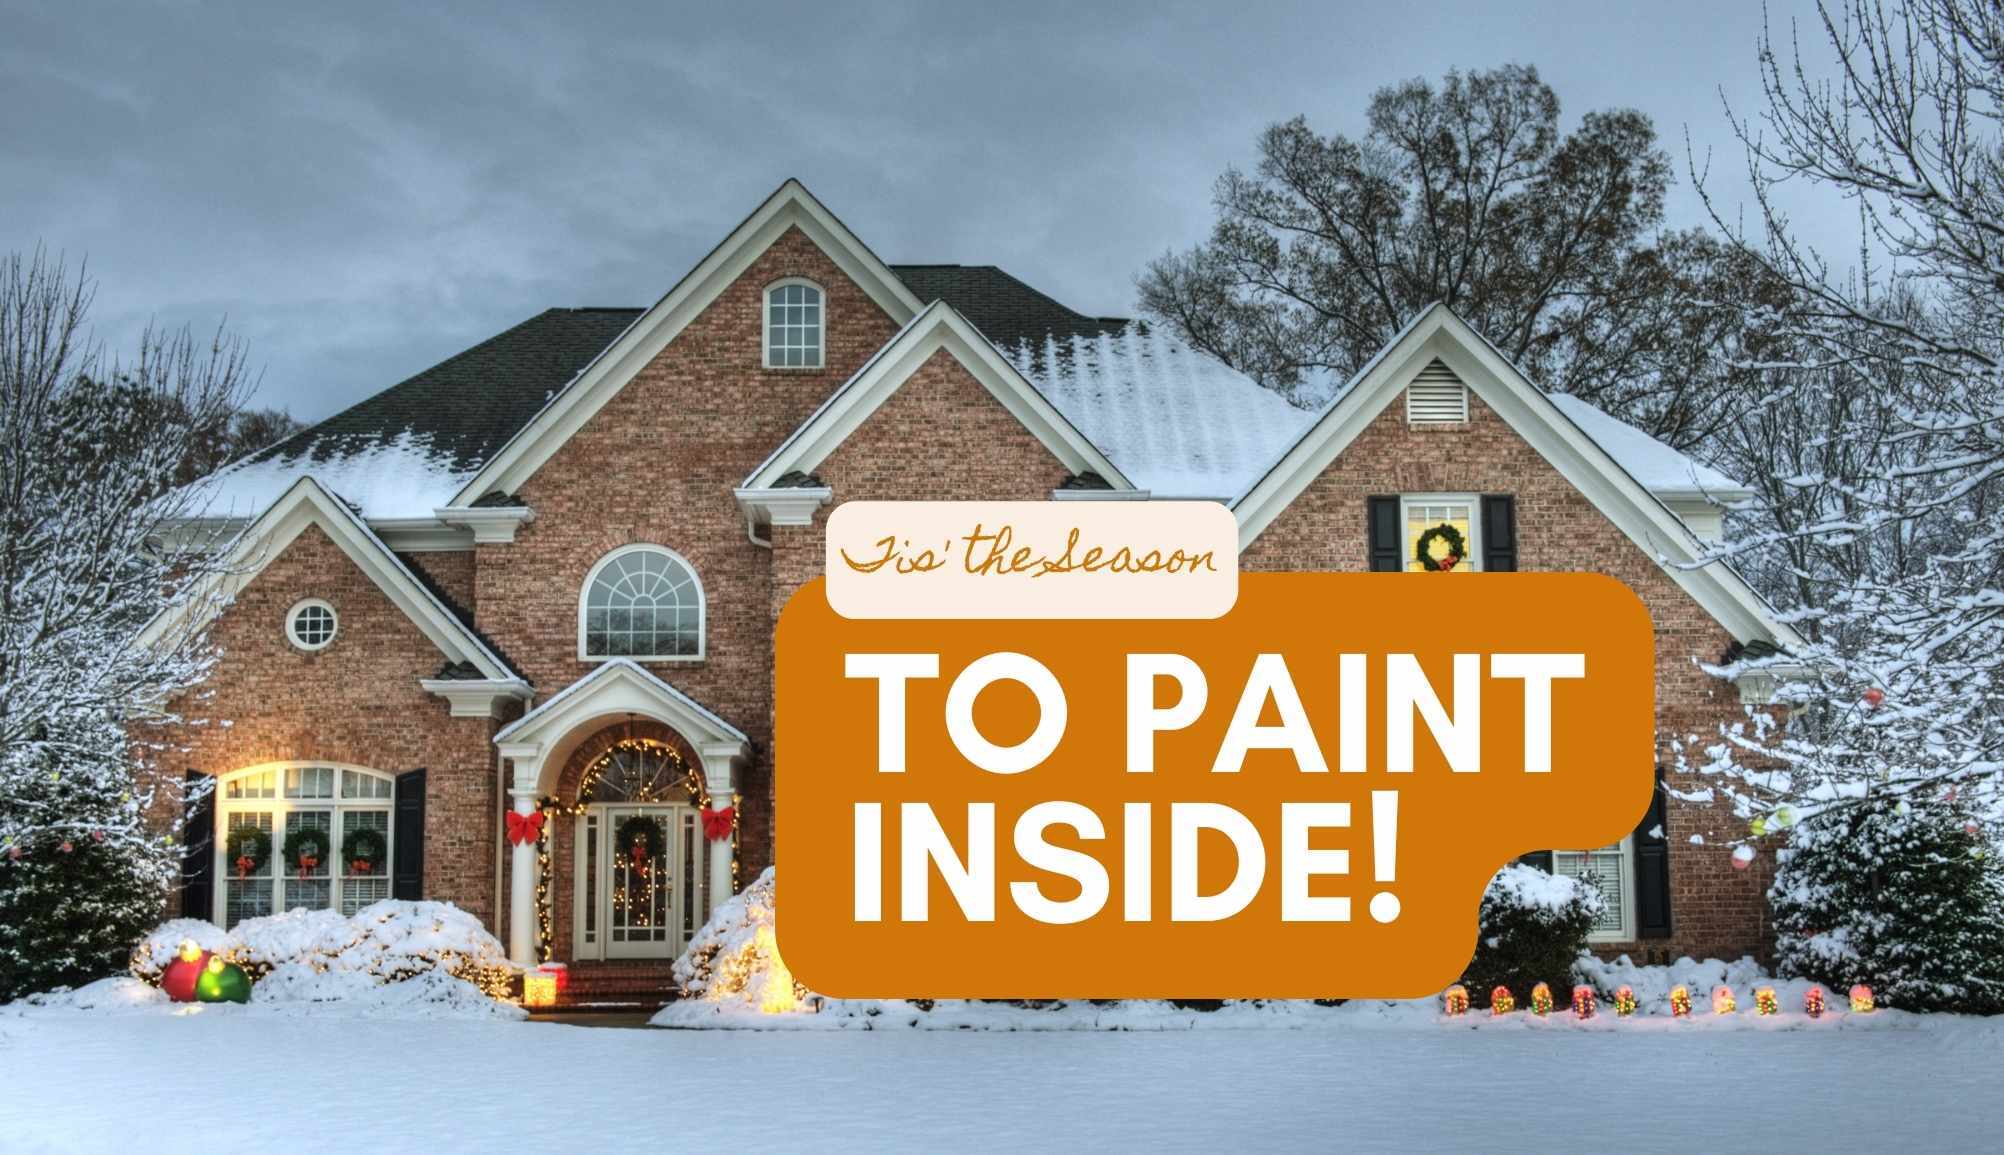 Winter is the season for interior painting